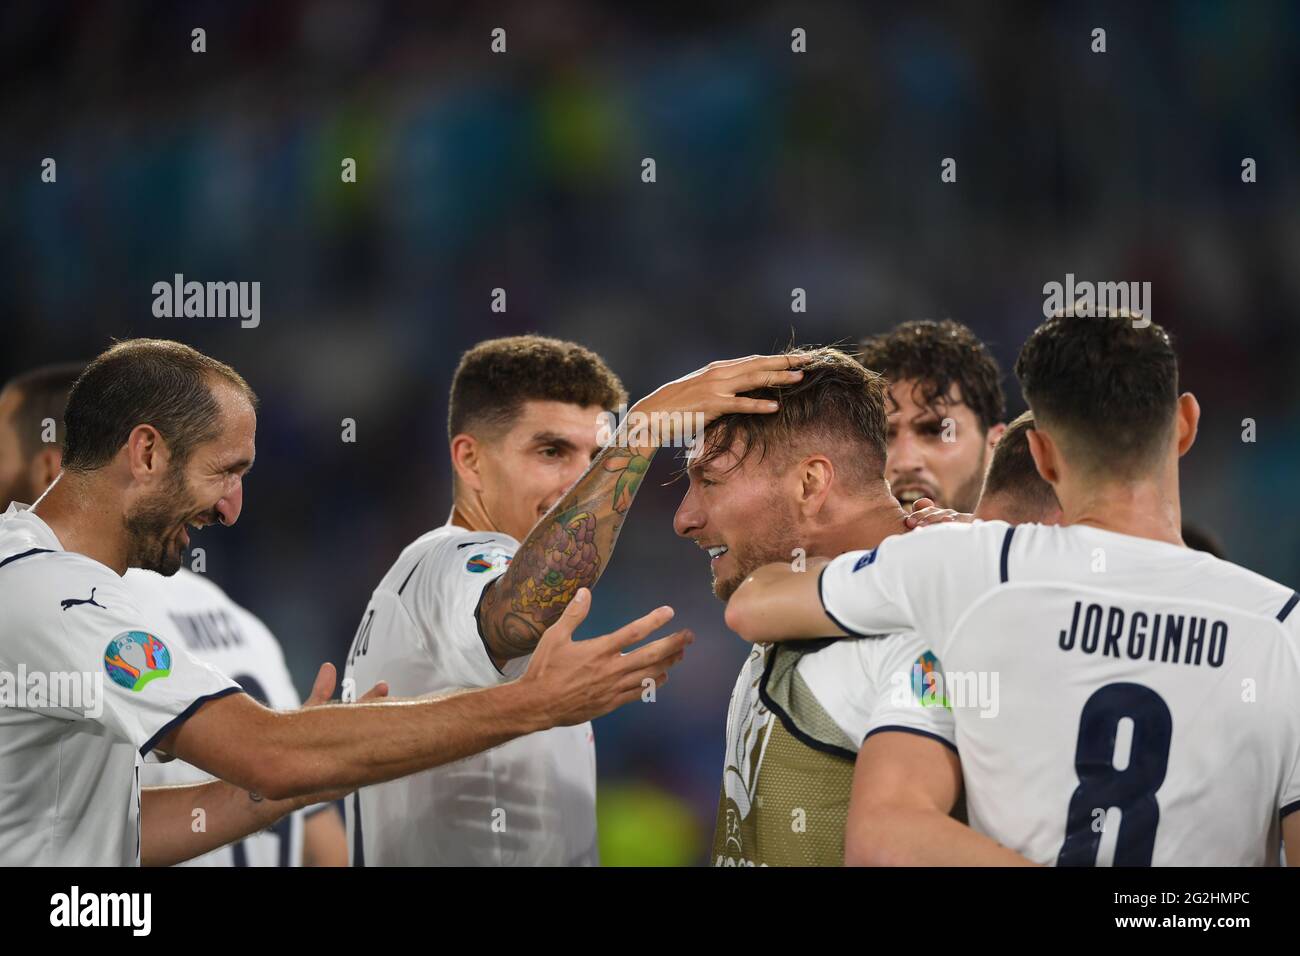 Rome, Italy. 11th June 2021. Ciro Immobile (Italy) celebrates after scoring his team's second goal during the Uefa 'European Championship 2020' match between Turkey 0-3 Italy at Olimpic Stadium on June 11, 2021 in Roma, Italy. Credit: Maurizio Borsari/AFLO/Alamy Live News Stock Photo